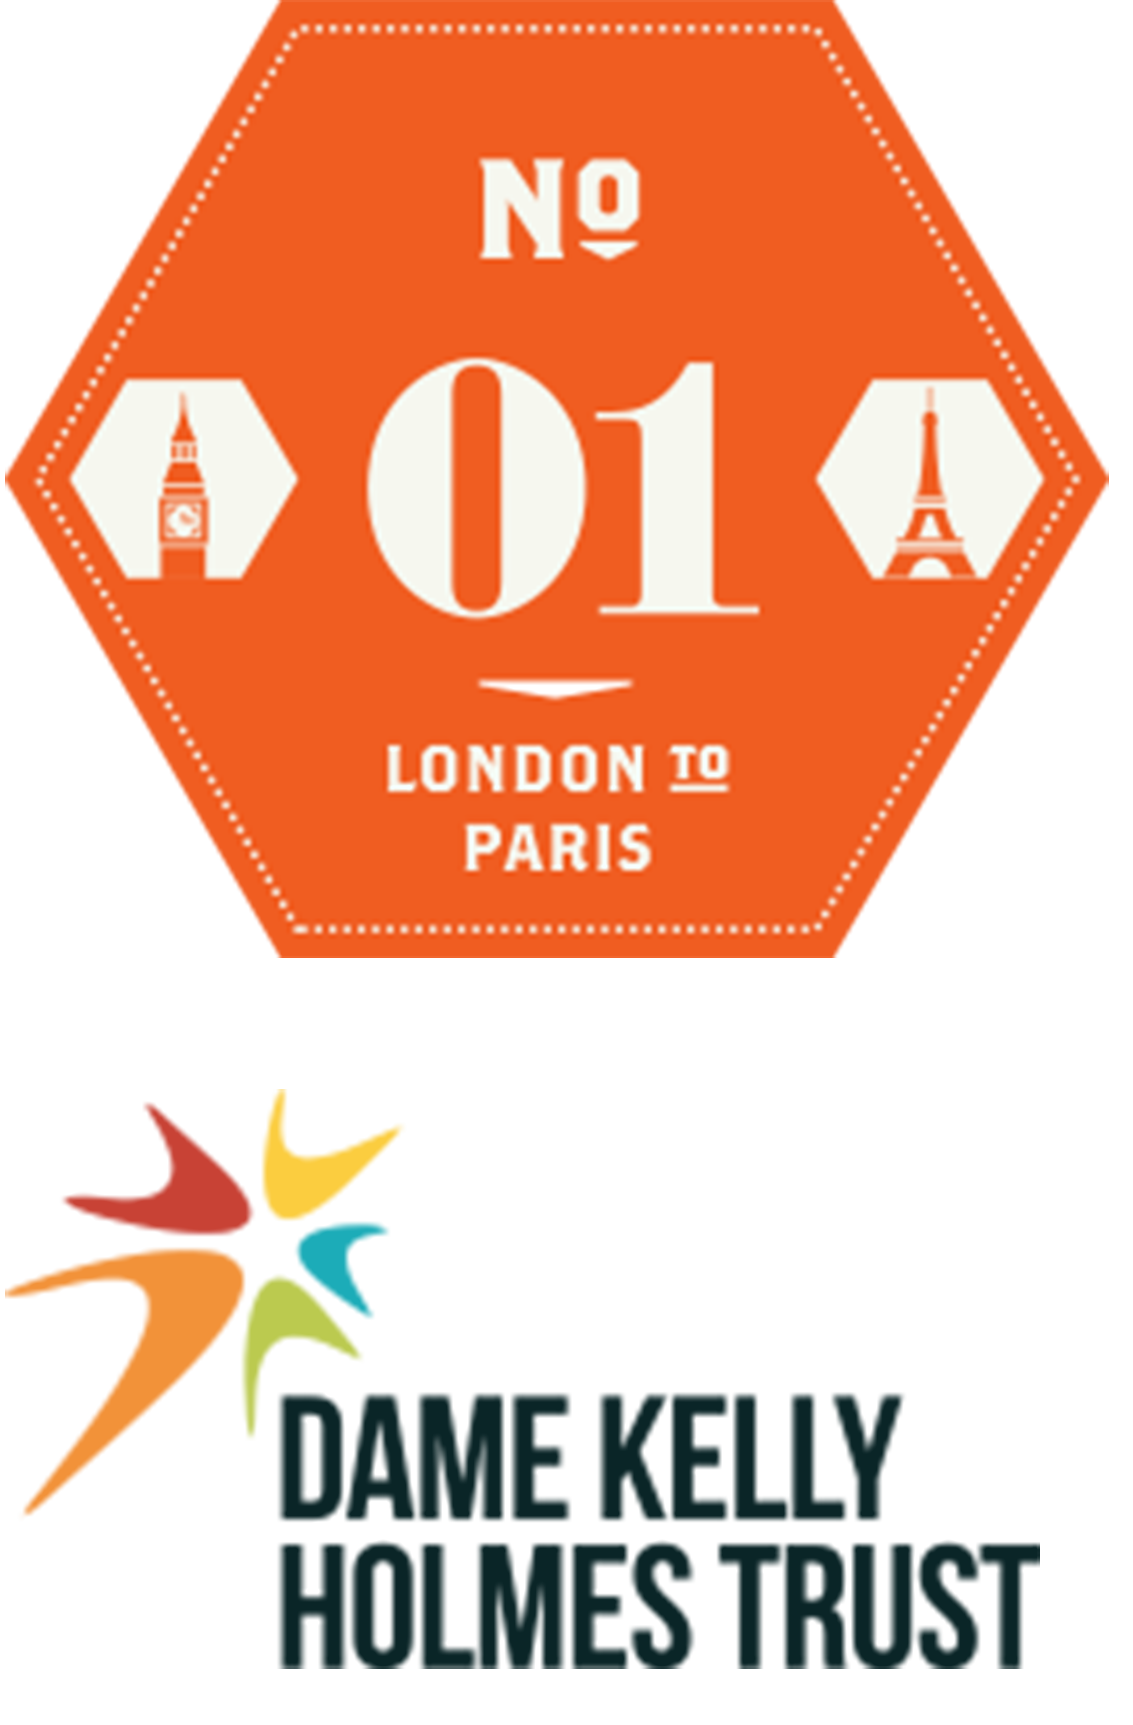 London to Paris Cycling Challenge - Cycling Tours - Ride25